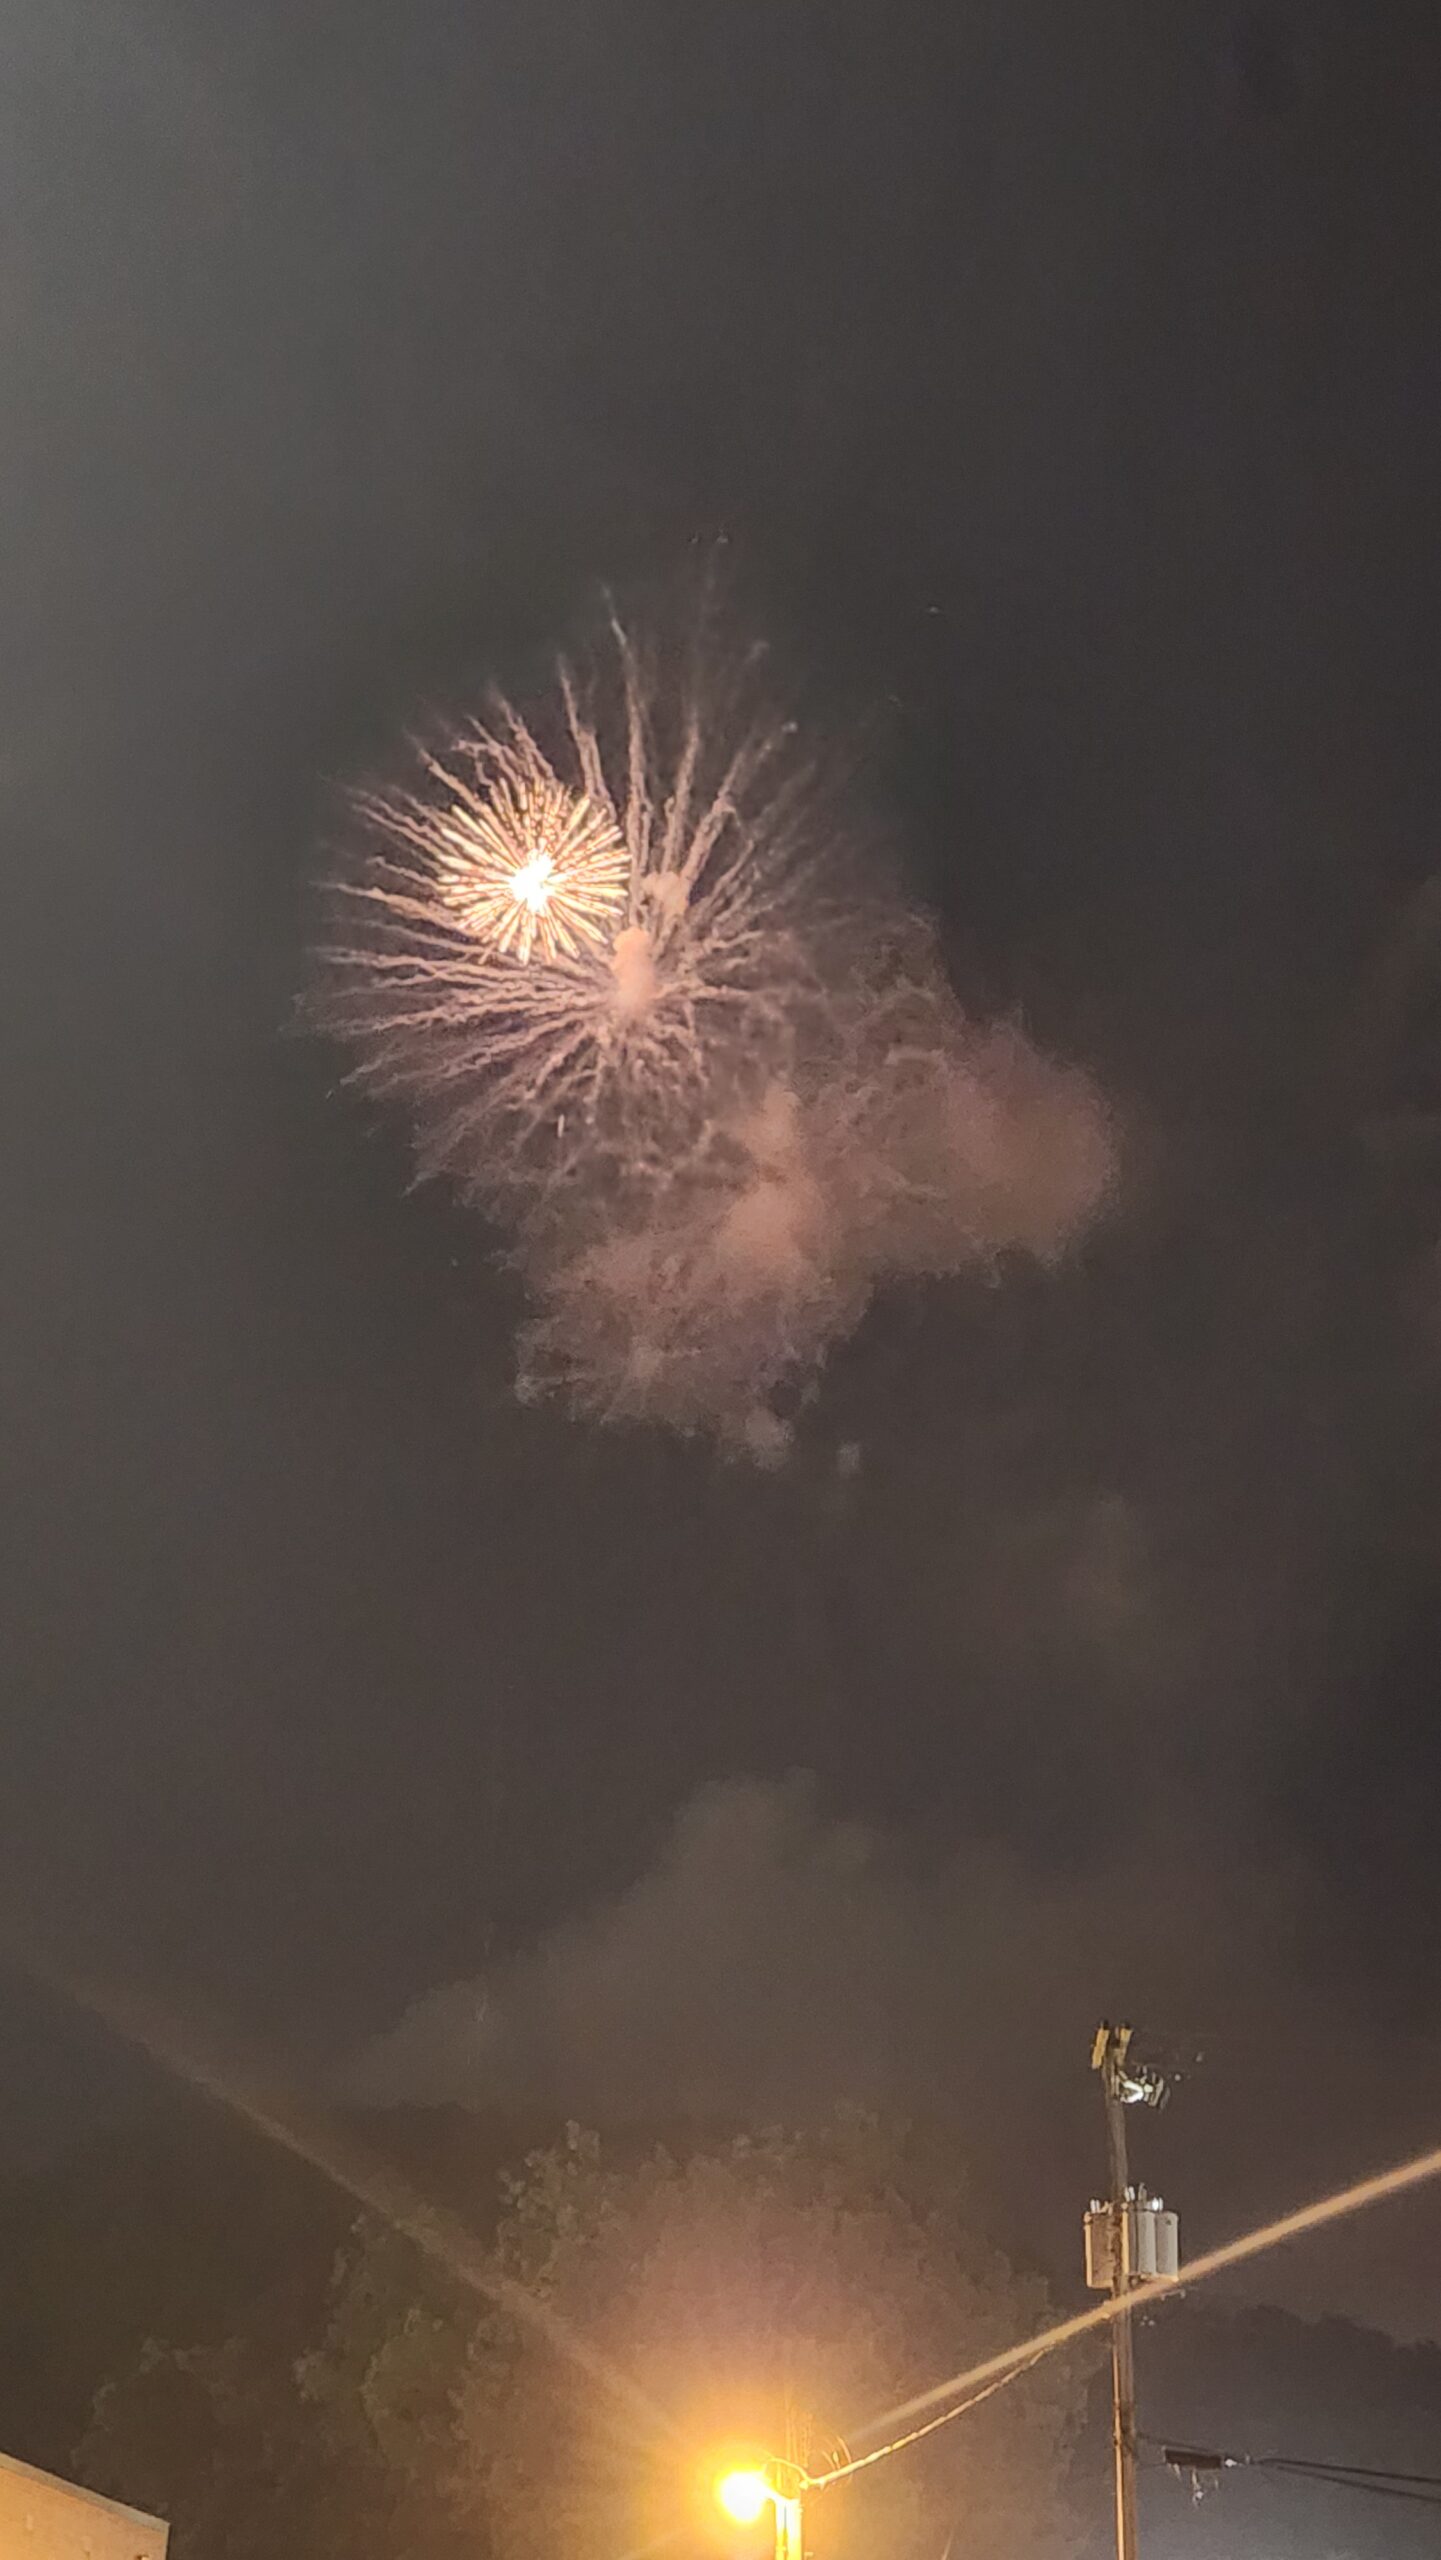 A smoky night sky, illuminated by a yellow firework exploding with pinpoints of light, highlighting smoke and clouds